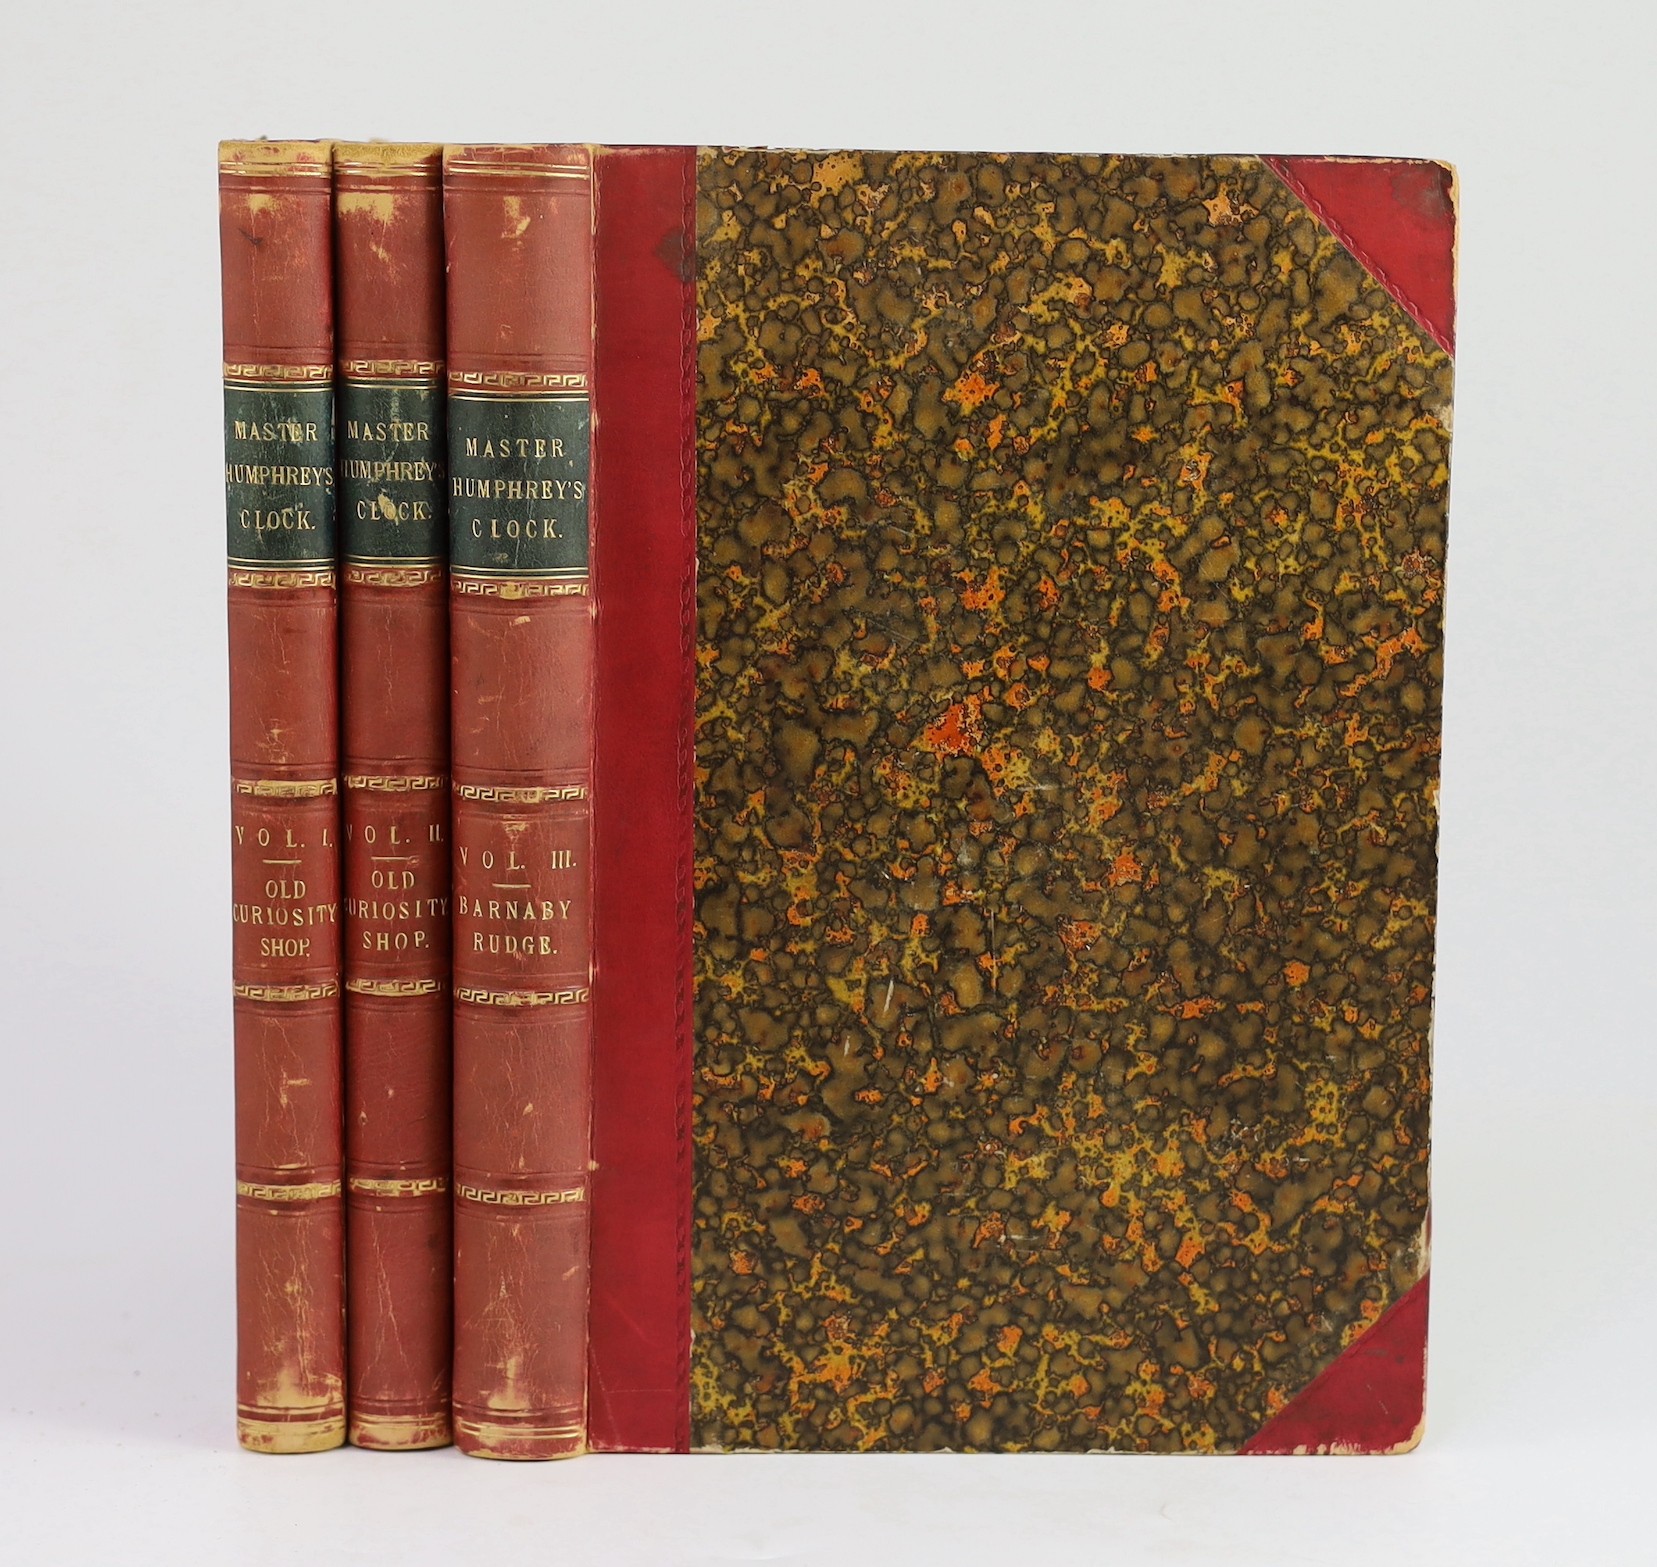 Dickens, Charles - Master Humphrey’s Clock, 1st edition in book form, 3 vols, quarter red calf with marbled boards, illustrated by George Cattermole and Halbot K. Browne (‘’Phiz’’), Chapman and Hall, London, 1840-41